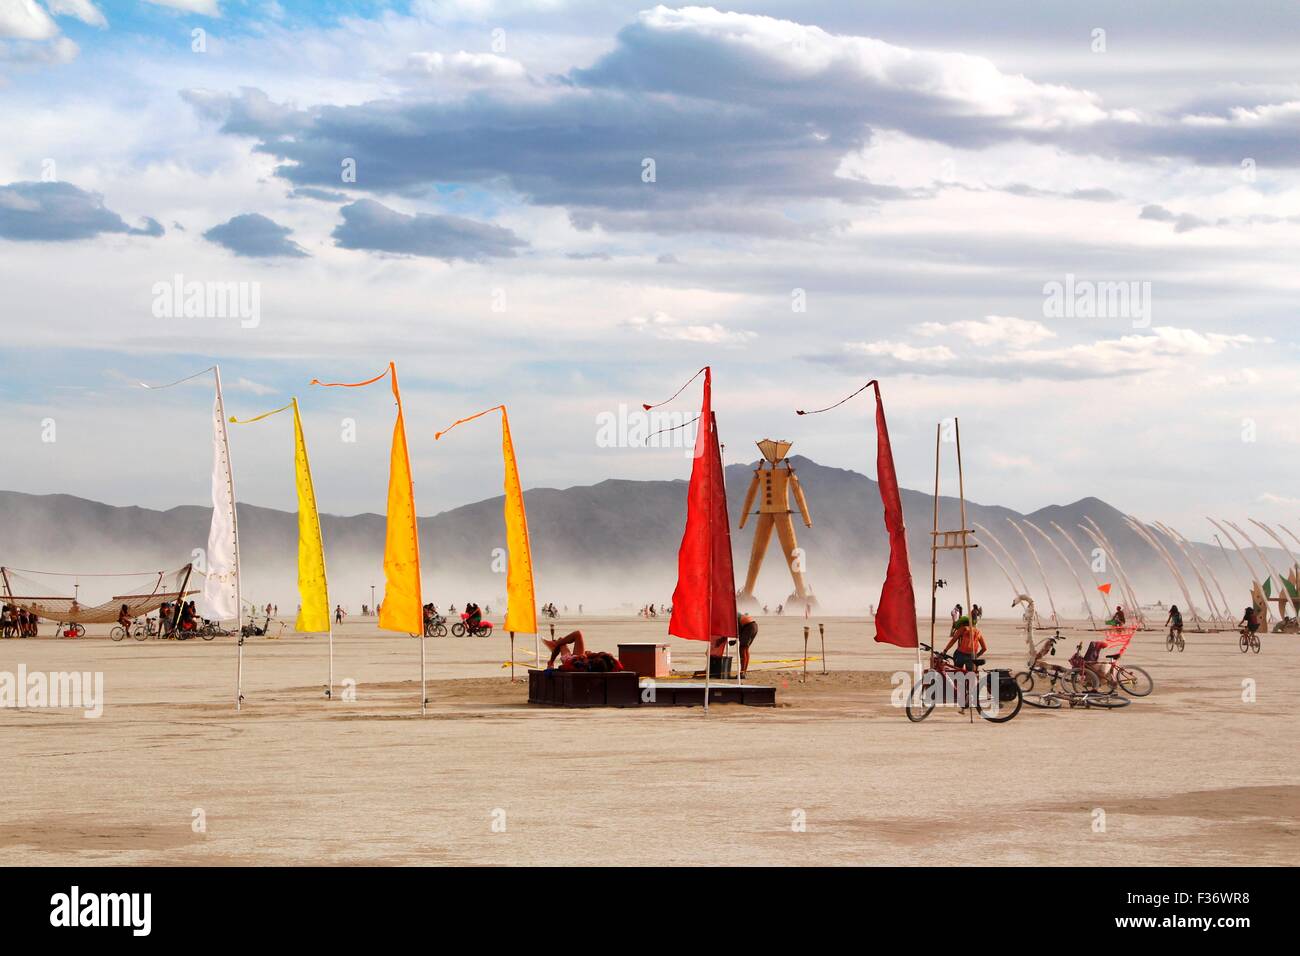 View of the playa during the annual Burning Man festival in the desert August 30, 2014 in Black Rock City, Nevada. Stock Photo